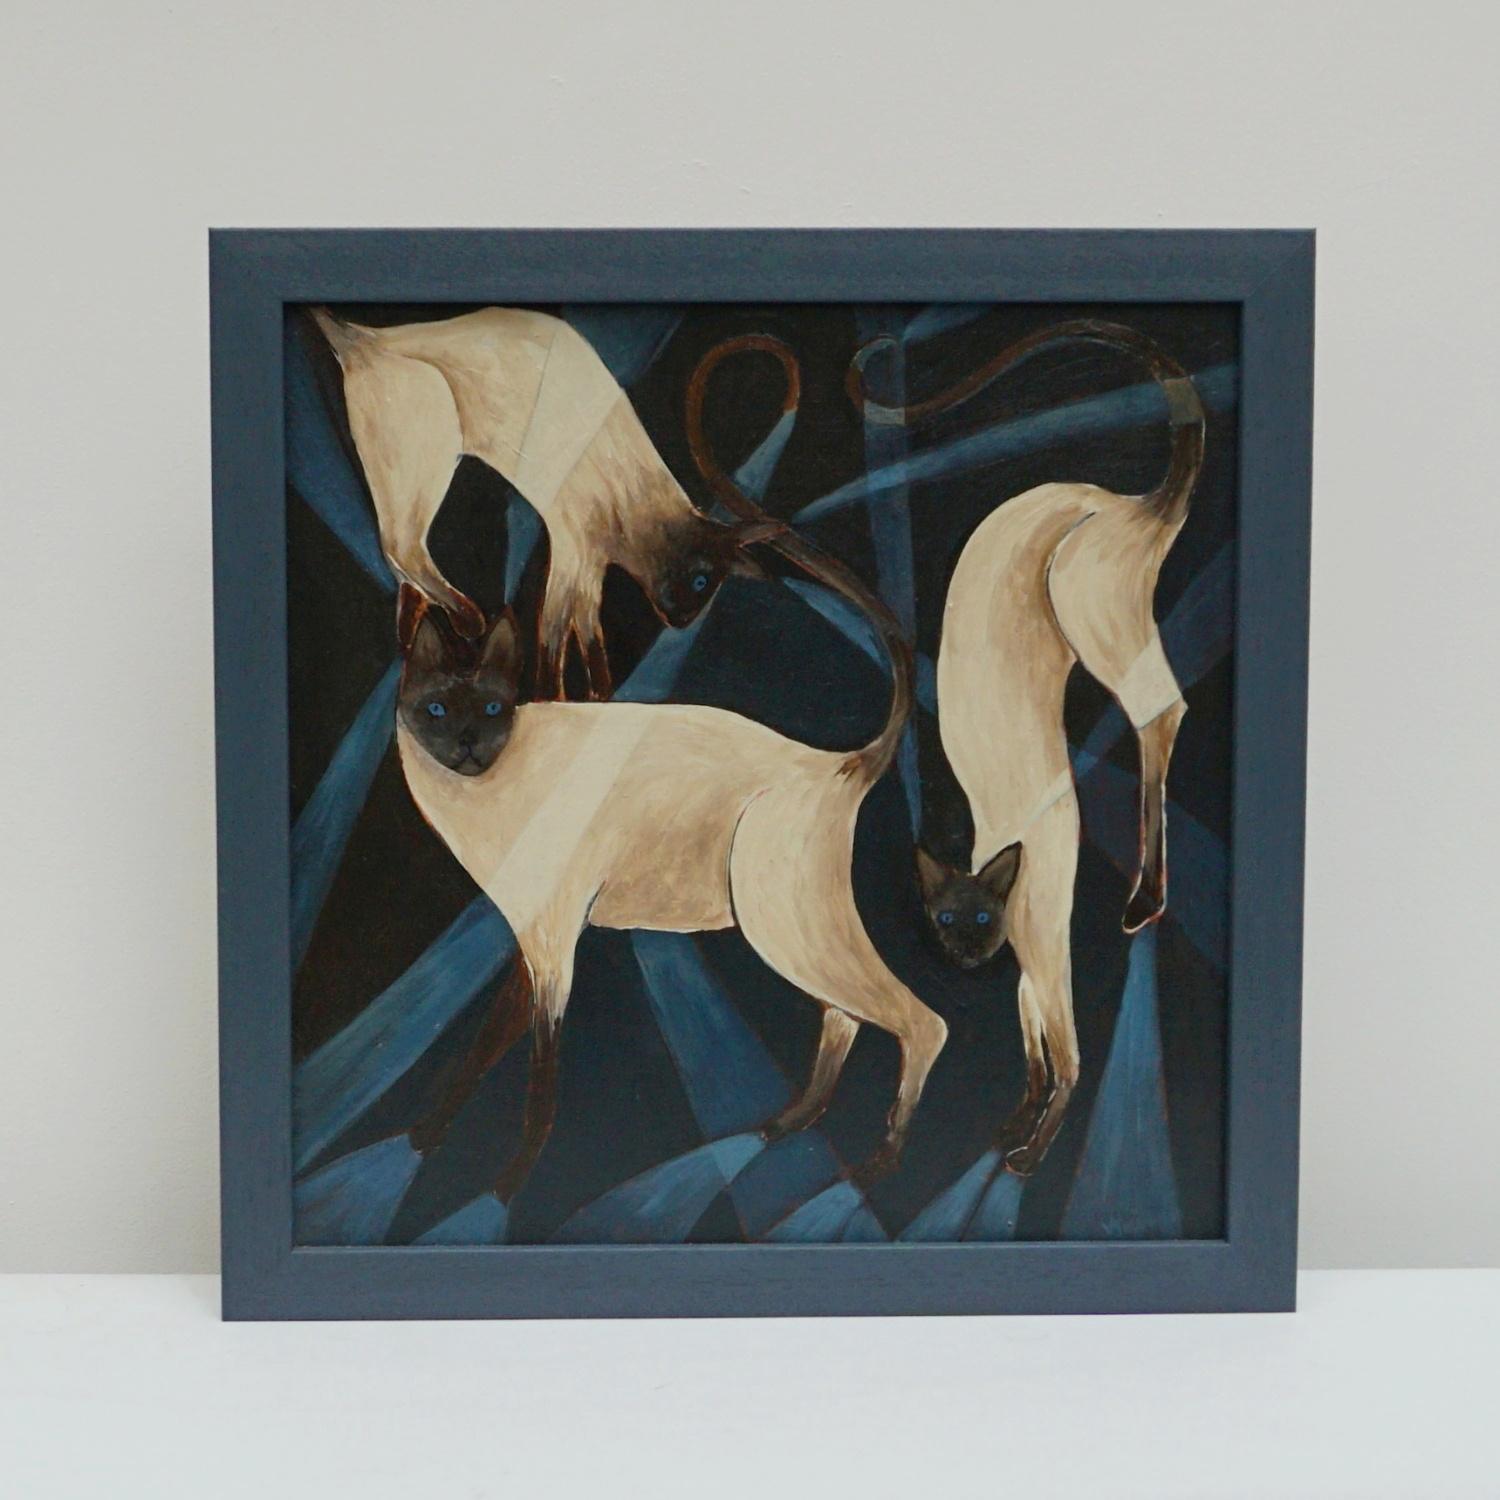 'Three Siamese Cats' An Art Deco style contemporary painting by Vera Jefferson depicting Siamese cats stretching amongst a stylised background. Signed V Jefferson to lower right. 

Dimensions: H 45cm W 45cm D 2cm

Vera Jefferson trained at